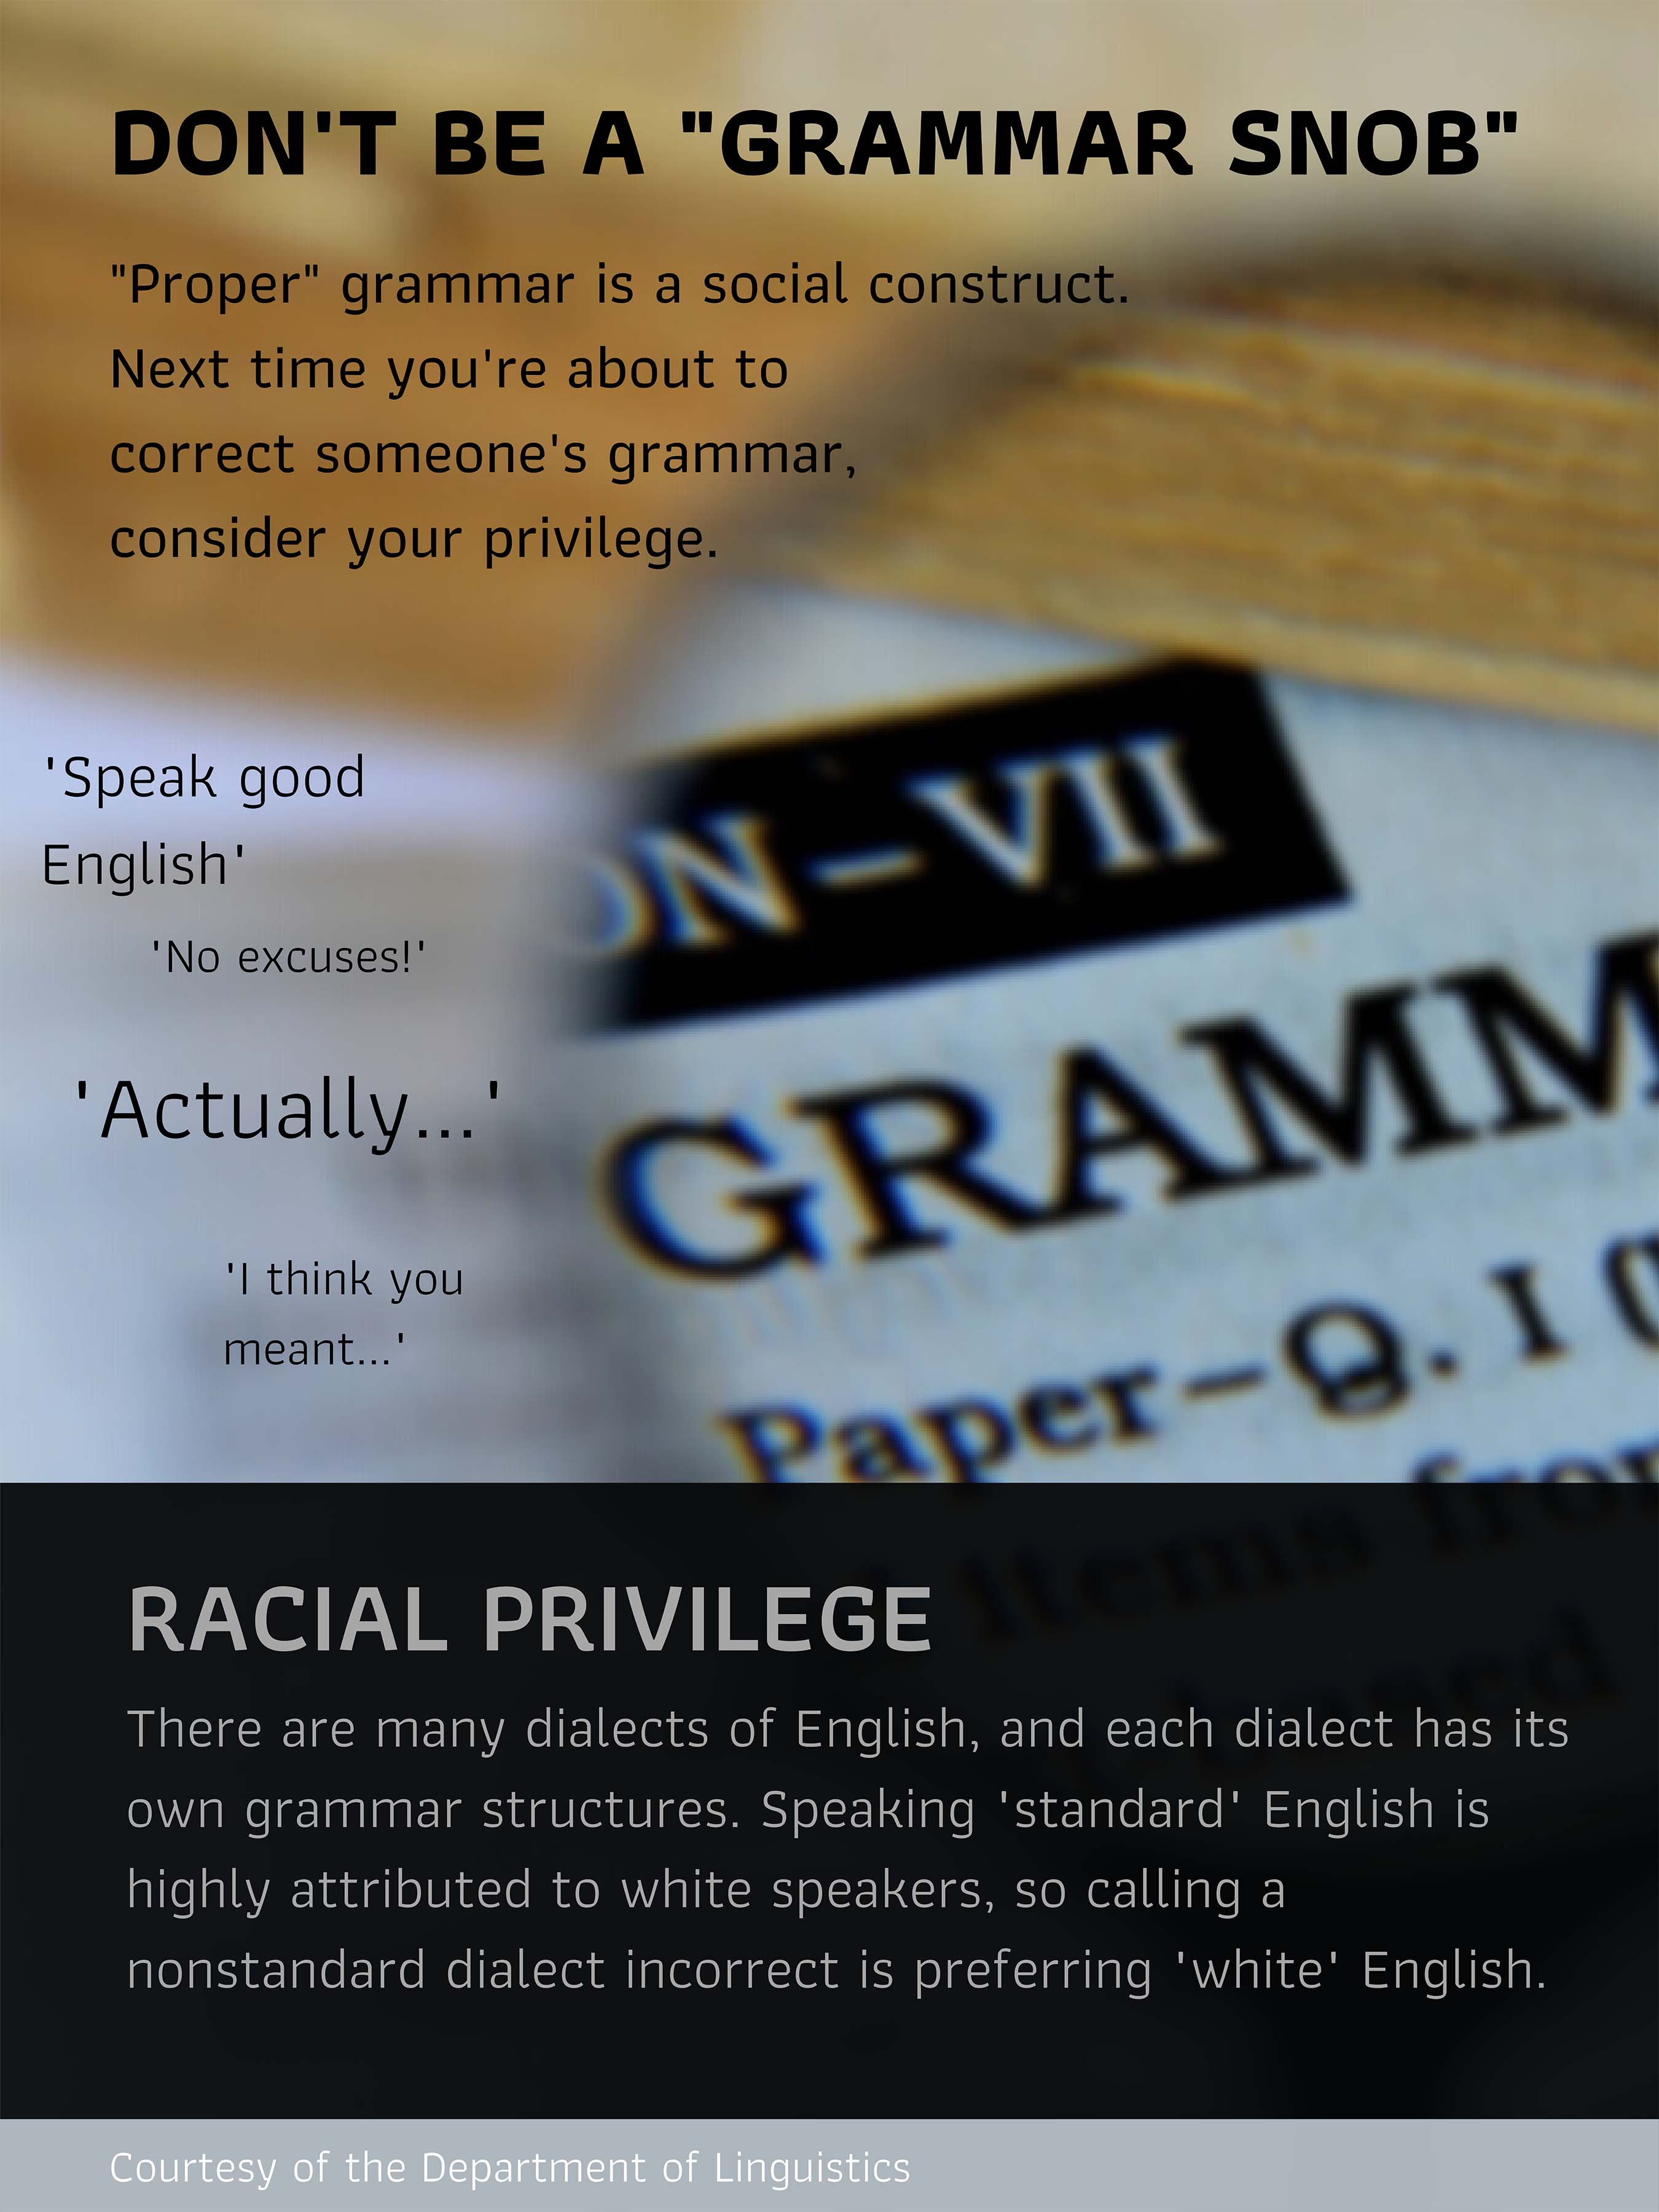 Don't be a "grammar snob." Consider your racial privilege. Click on image for full description.